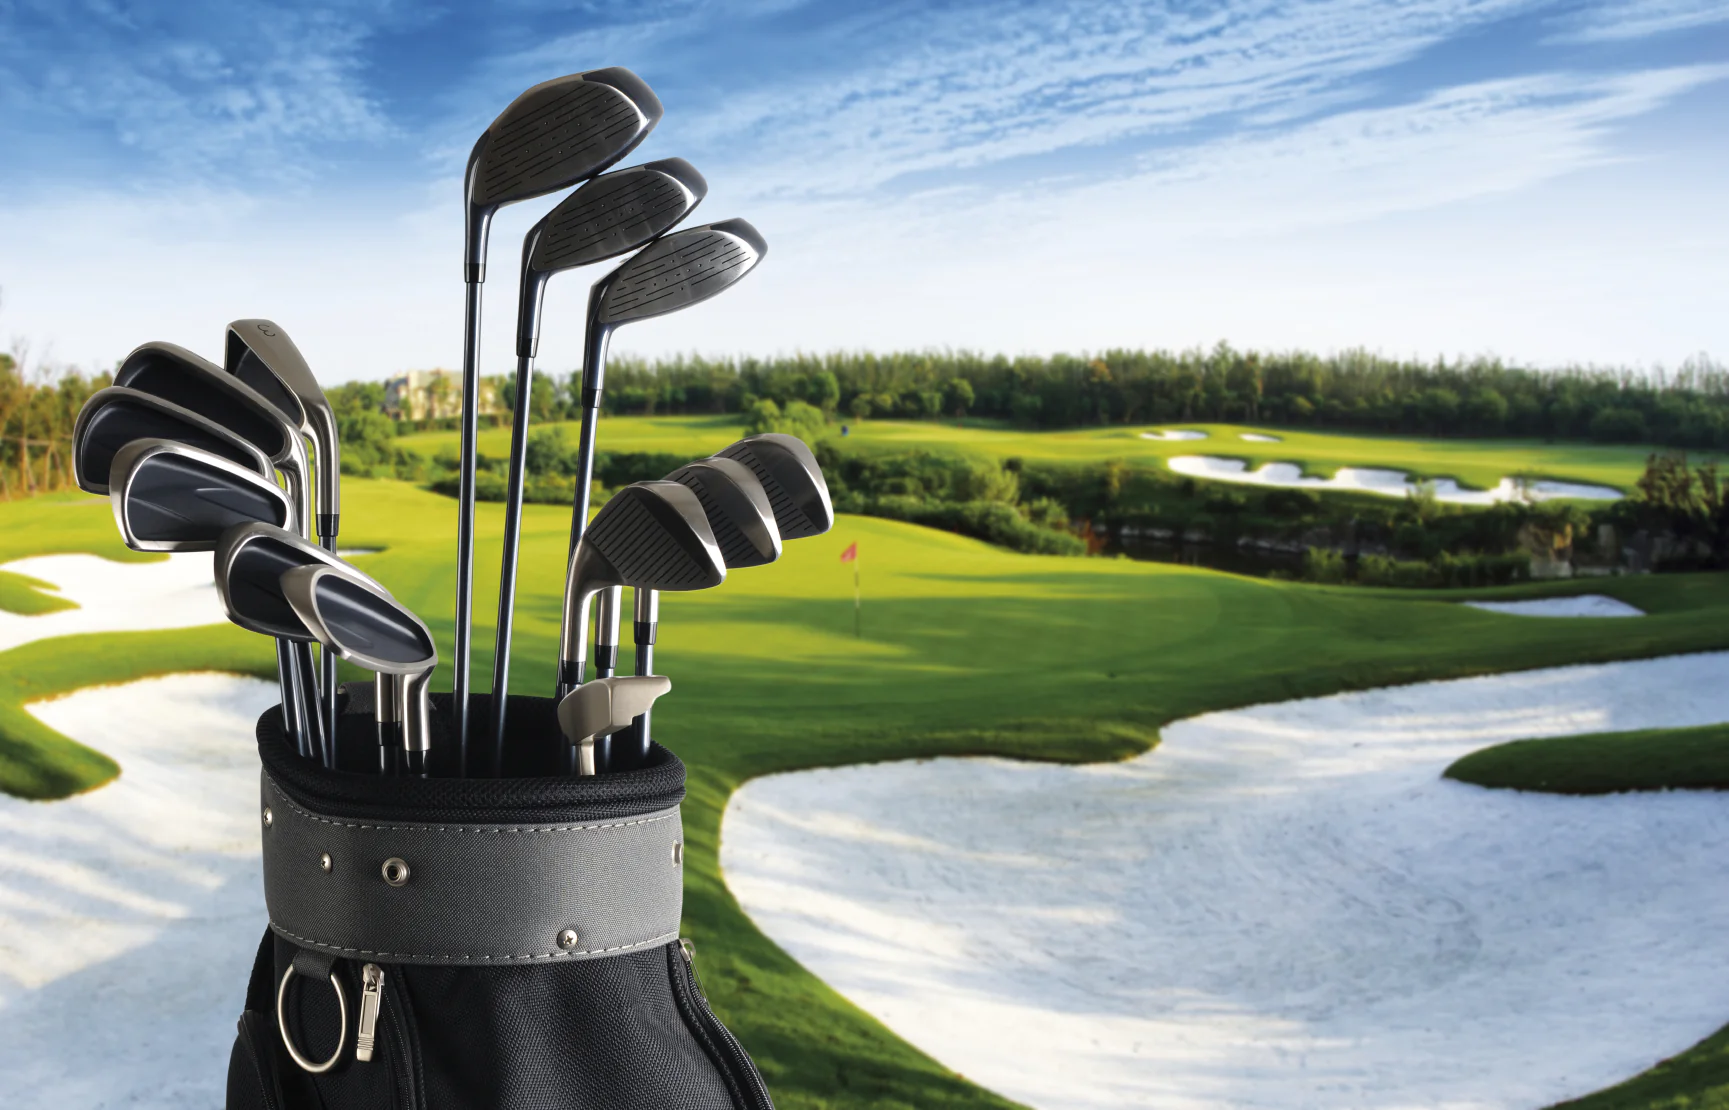 How to select new golf clubs: Part 2 - club round up